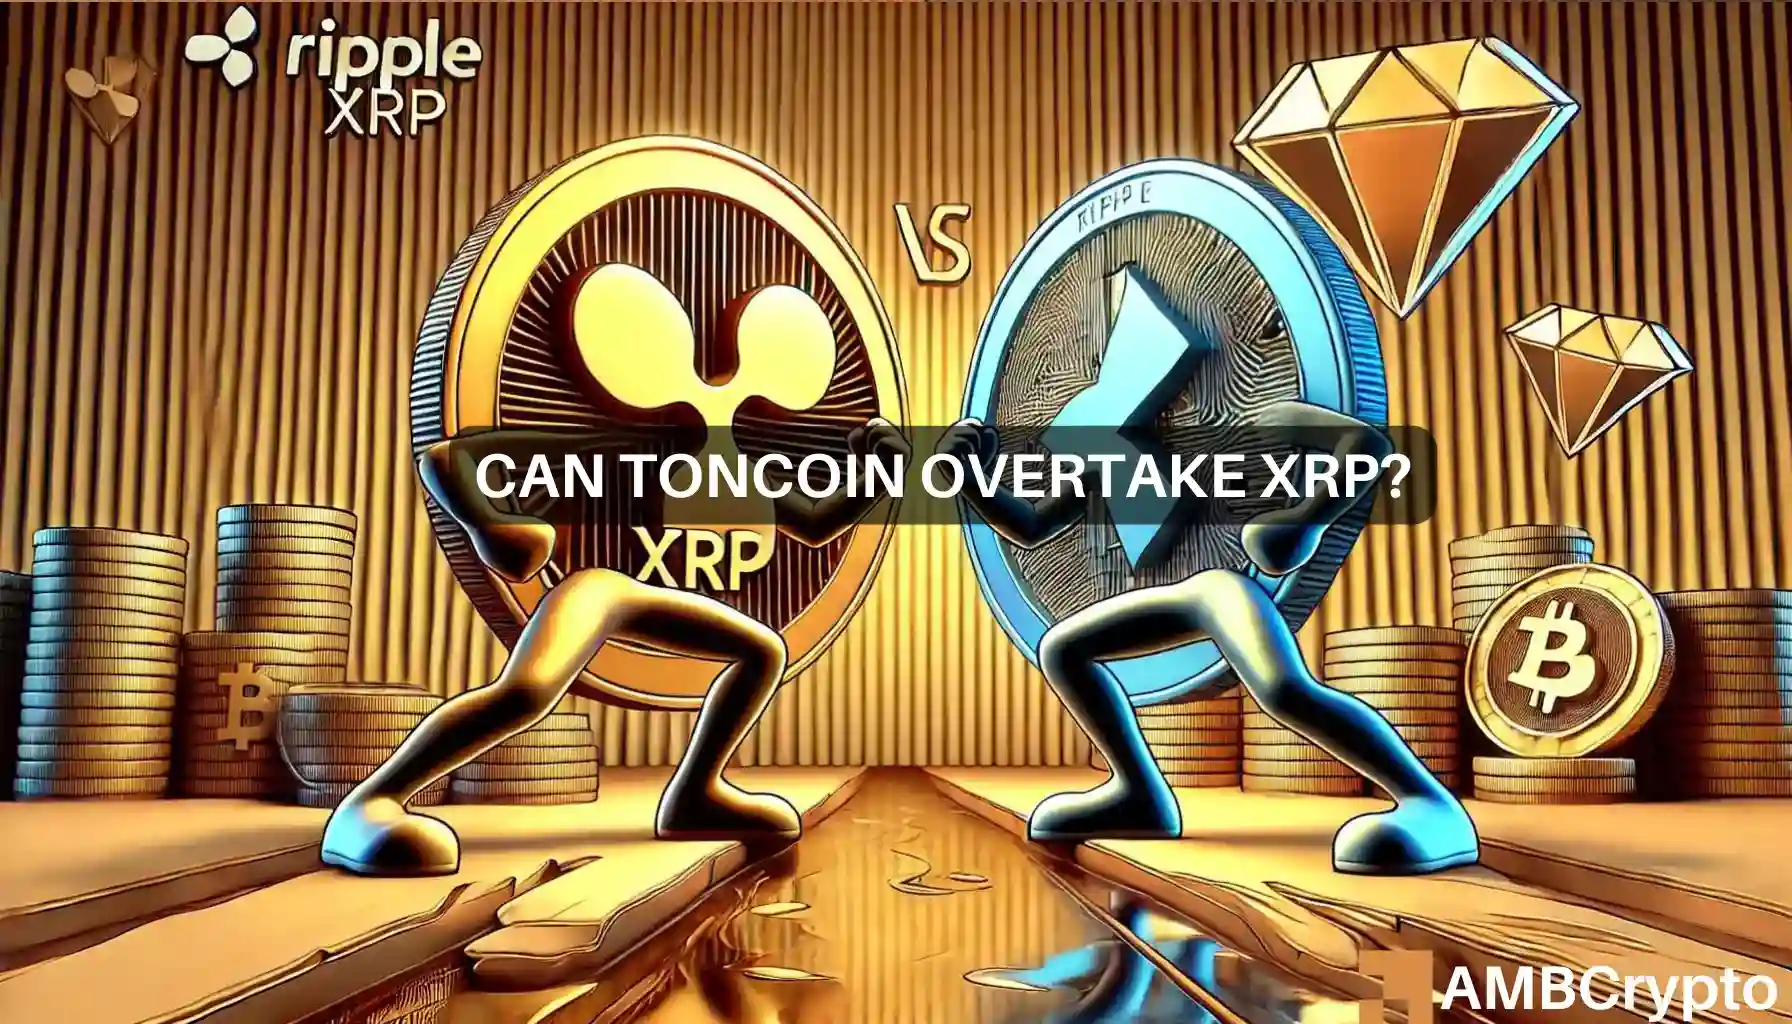 Can Toncoin flip Ripple’s XRP? Over 20% drop sparks questions